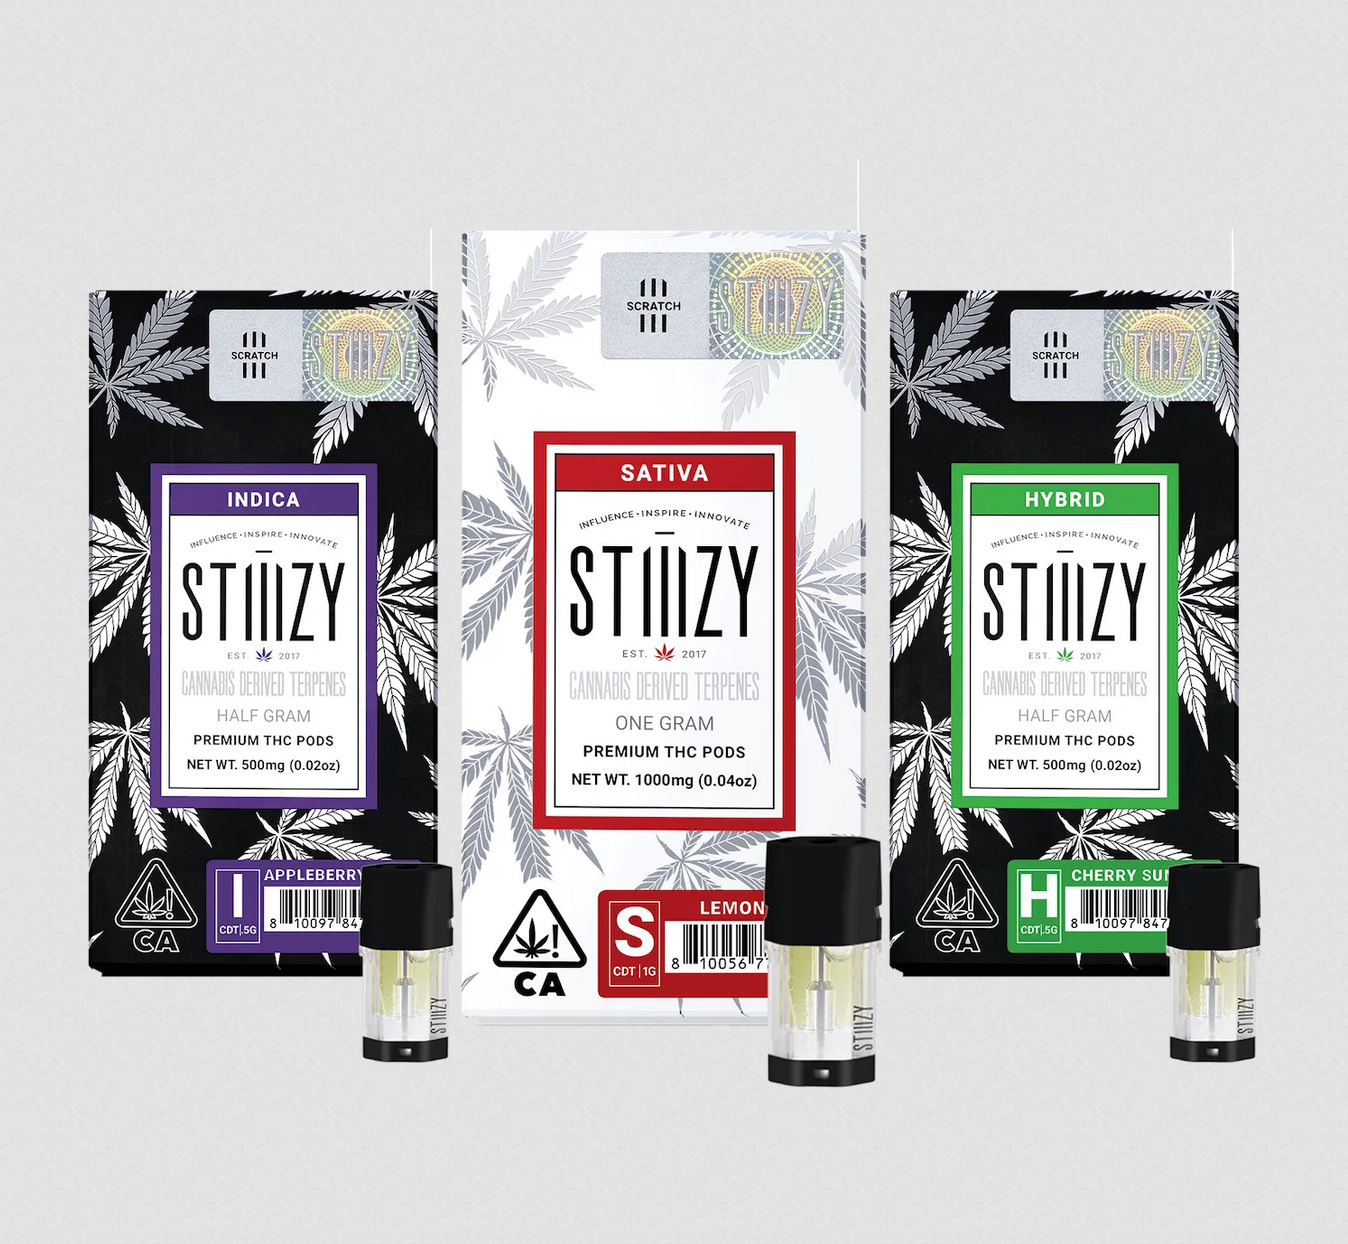 Weed vape pods housing distillate infused with cannabis-derived terpenes stand by their colorful packages.